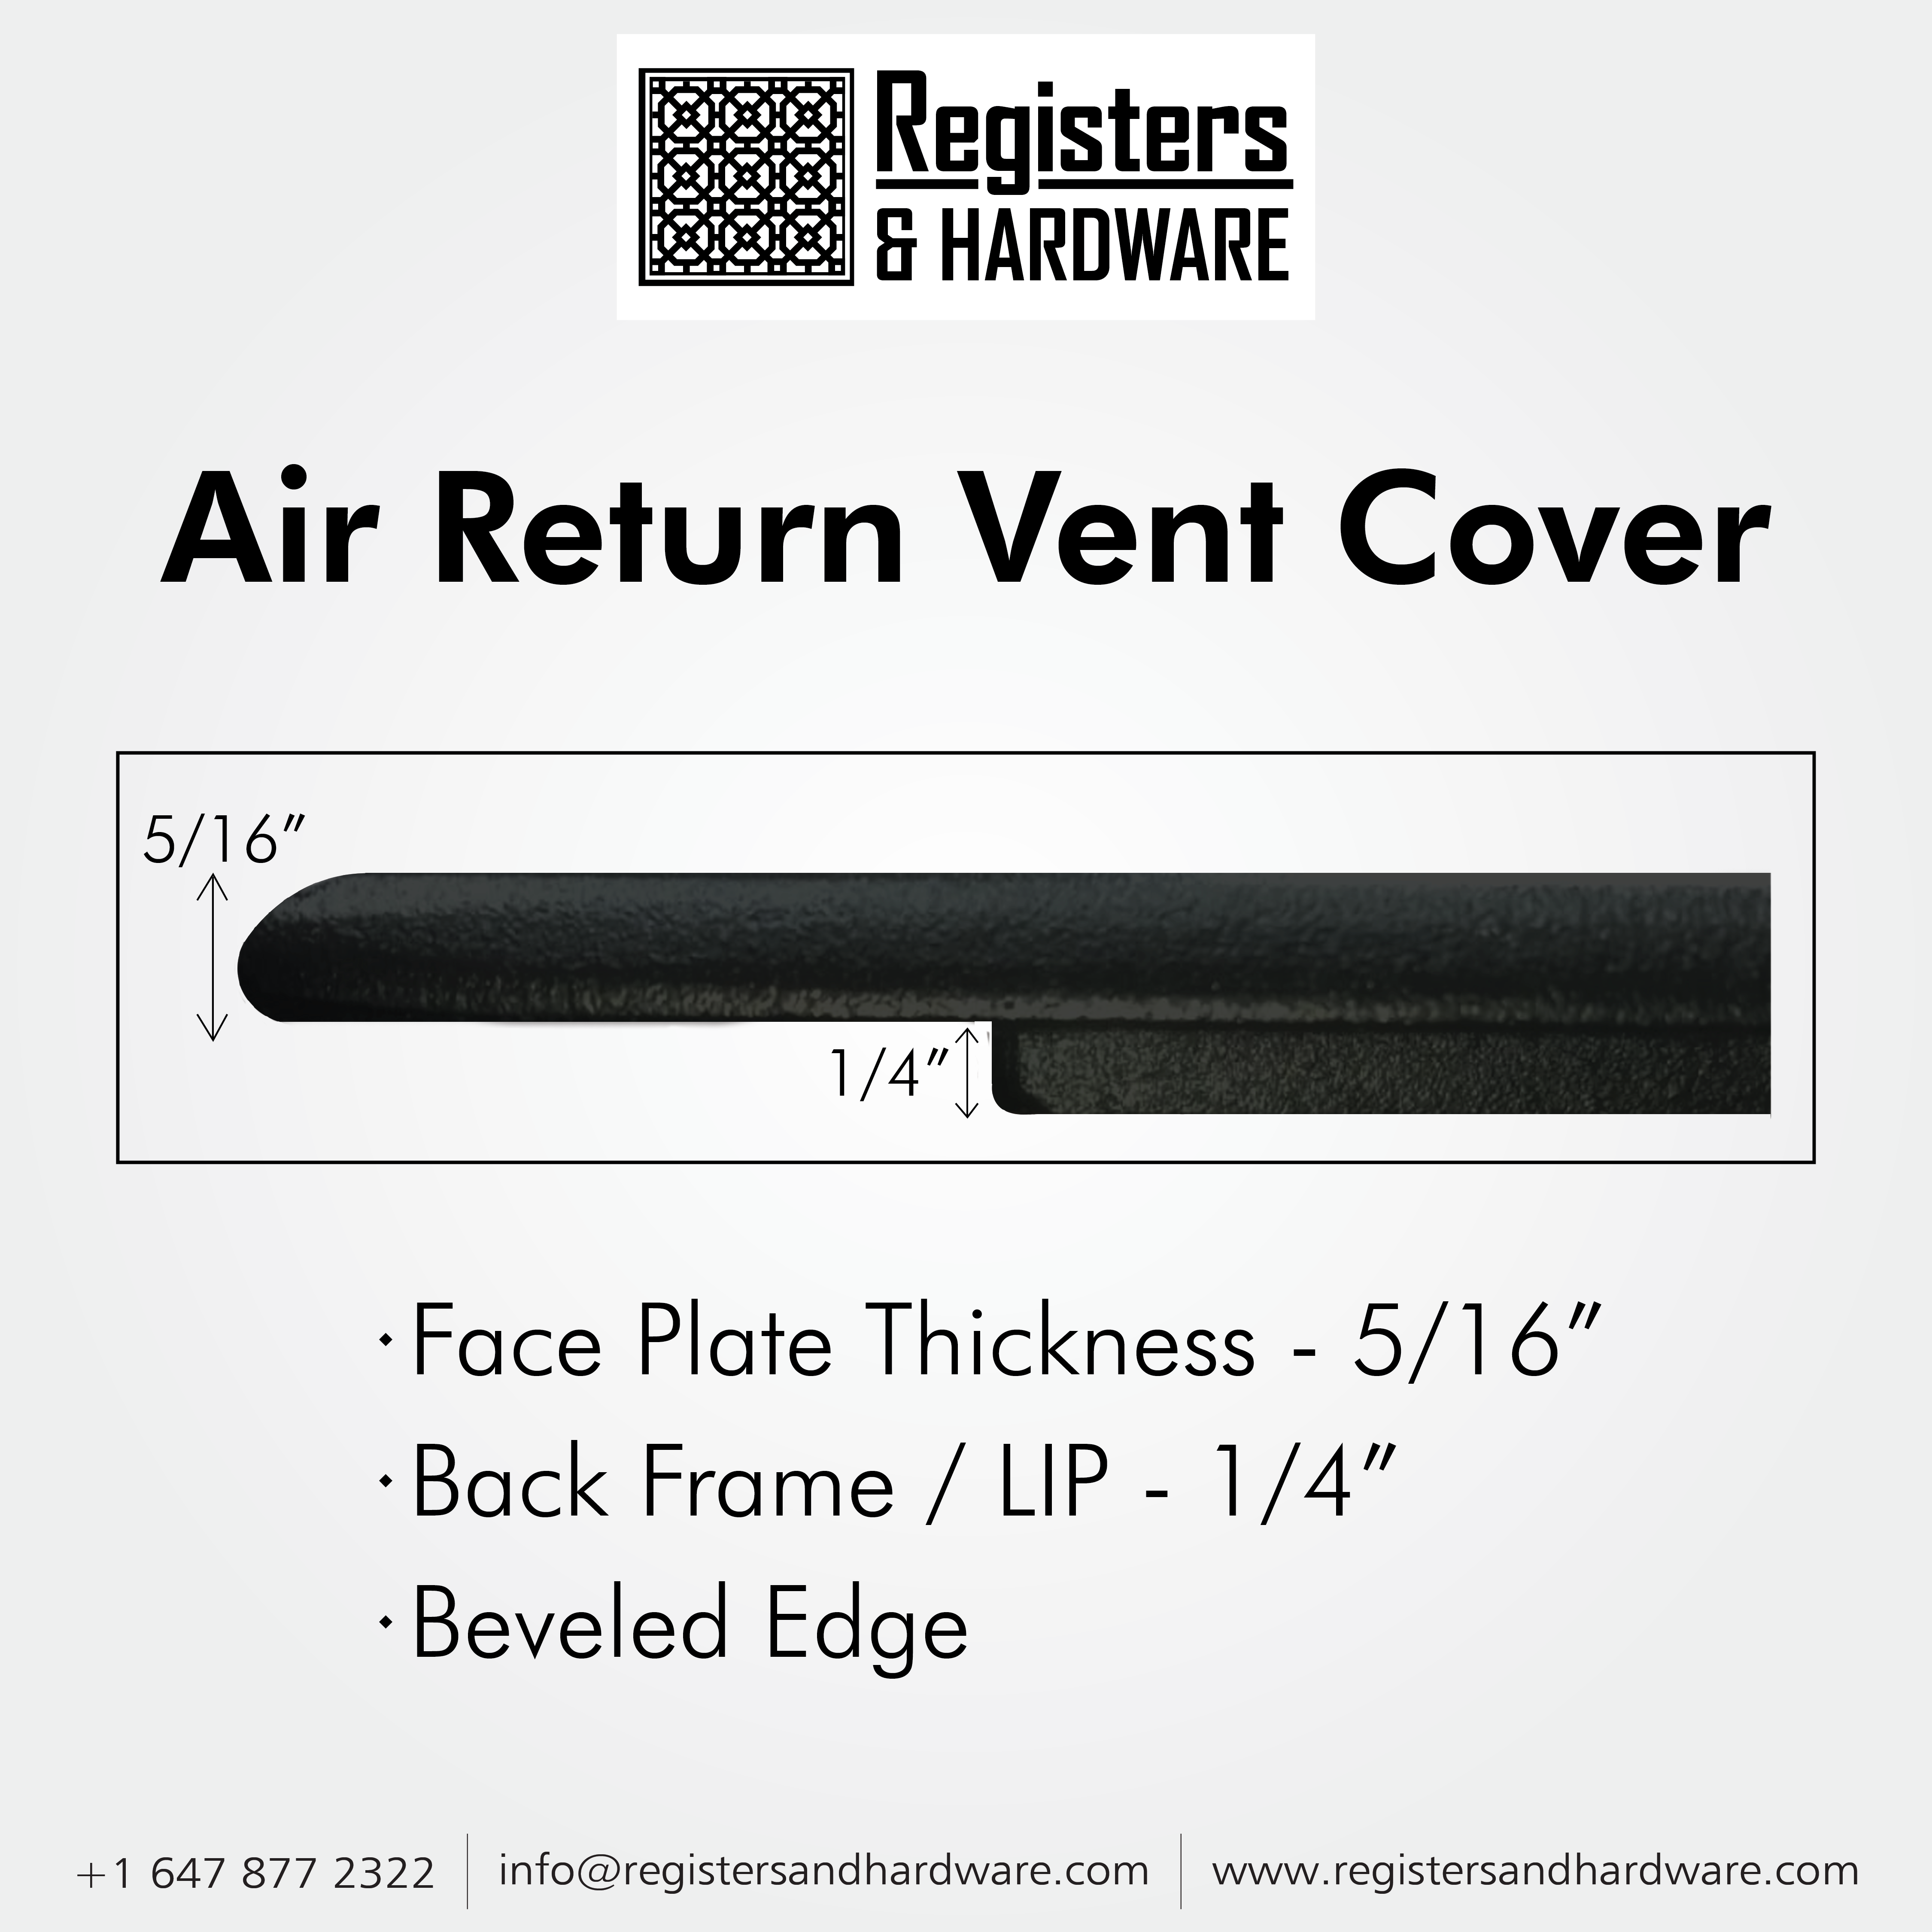 Achtek AIR RETURN 10"x20" Duct Opening (Overall Size 12"x22") | Heavy Cast Aluminum Air Grille HVAC Duct || Powder Coated